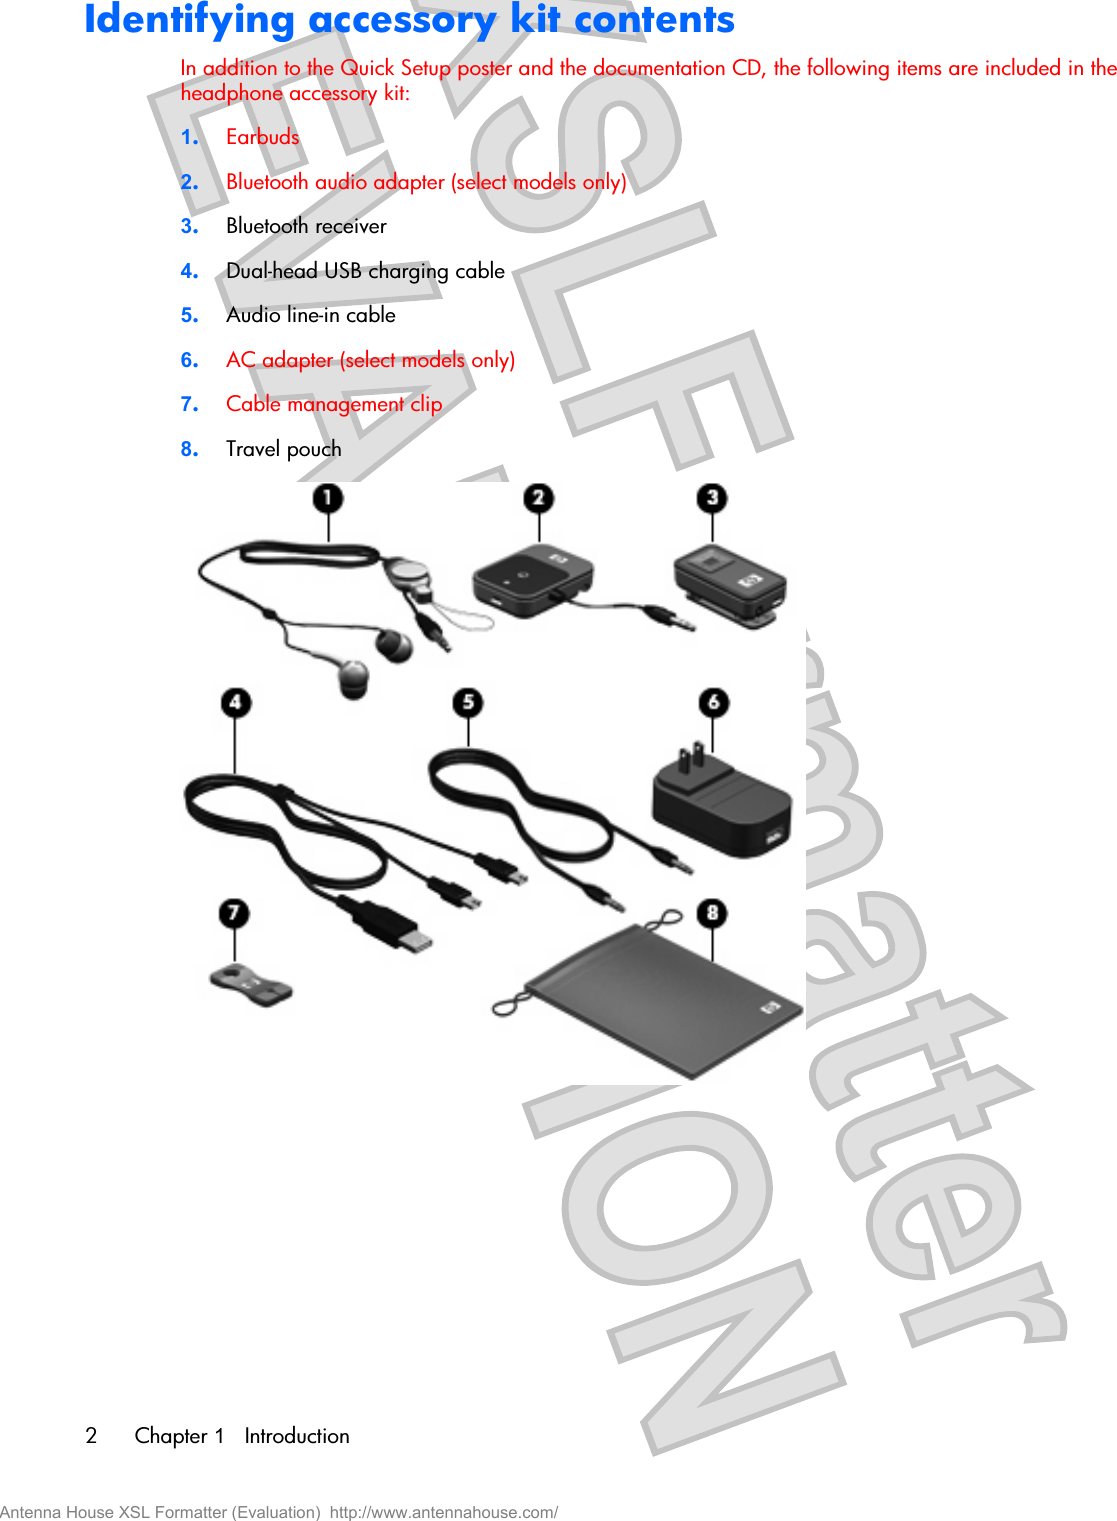 Identifying accessory kit contentsIn addition to the Quick Setup poster and the documentation CD, the following items are included in theheadphone accessory kit:1.Earbuds2.Bluetooth audio adapter (select models only)3.Bluetooth receiver4.Dual-head USB charging cable5.Audio line-in cable6.AC adapter (select models only)7.Cable management clip8.Travel pouch2Chapter 1   IntroductionAntenna House XSL Formatter (Evaluation)  http://www.antennahouse.com/